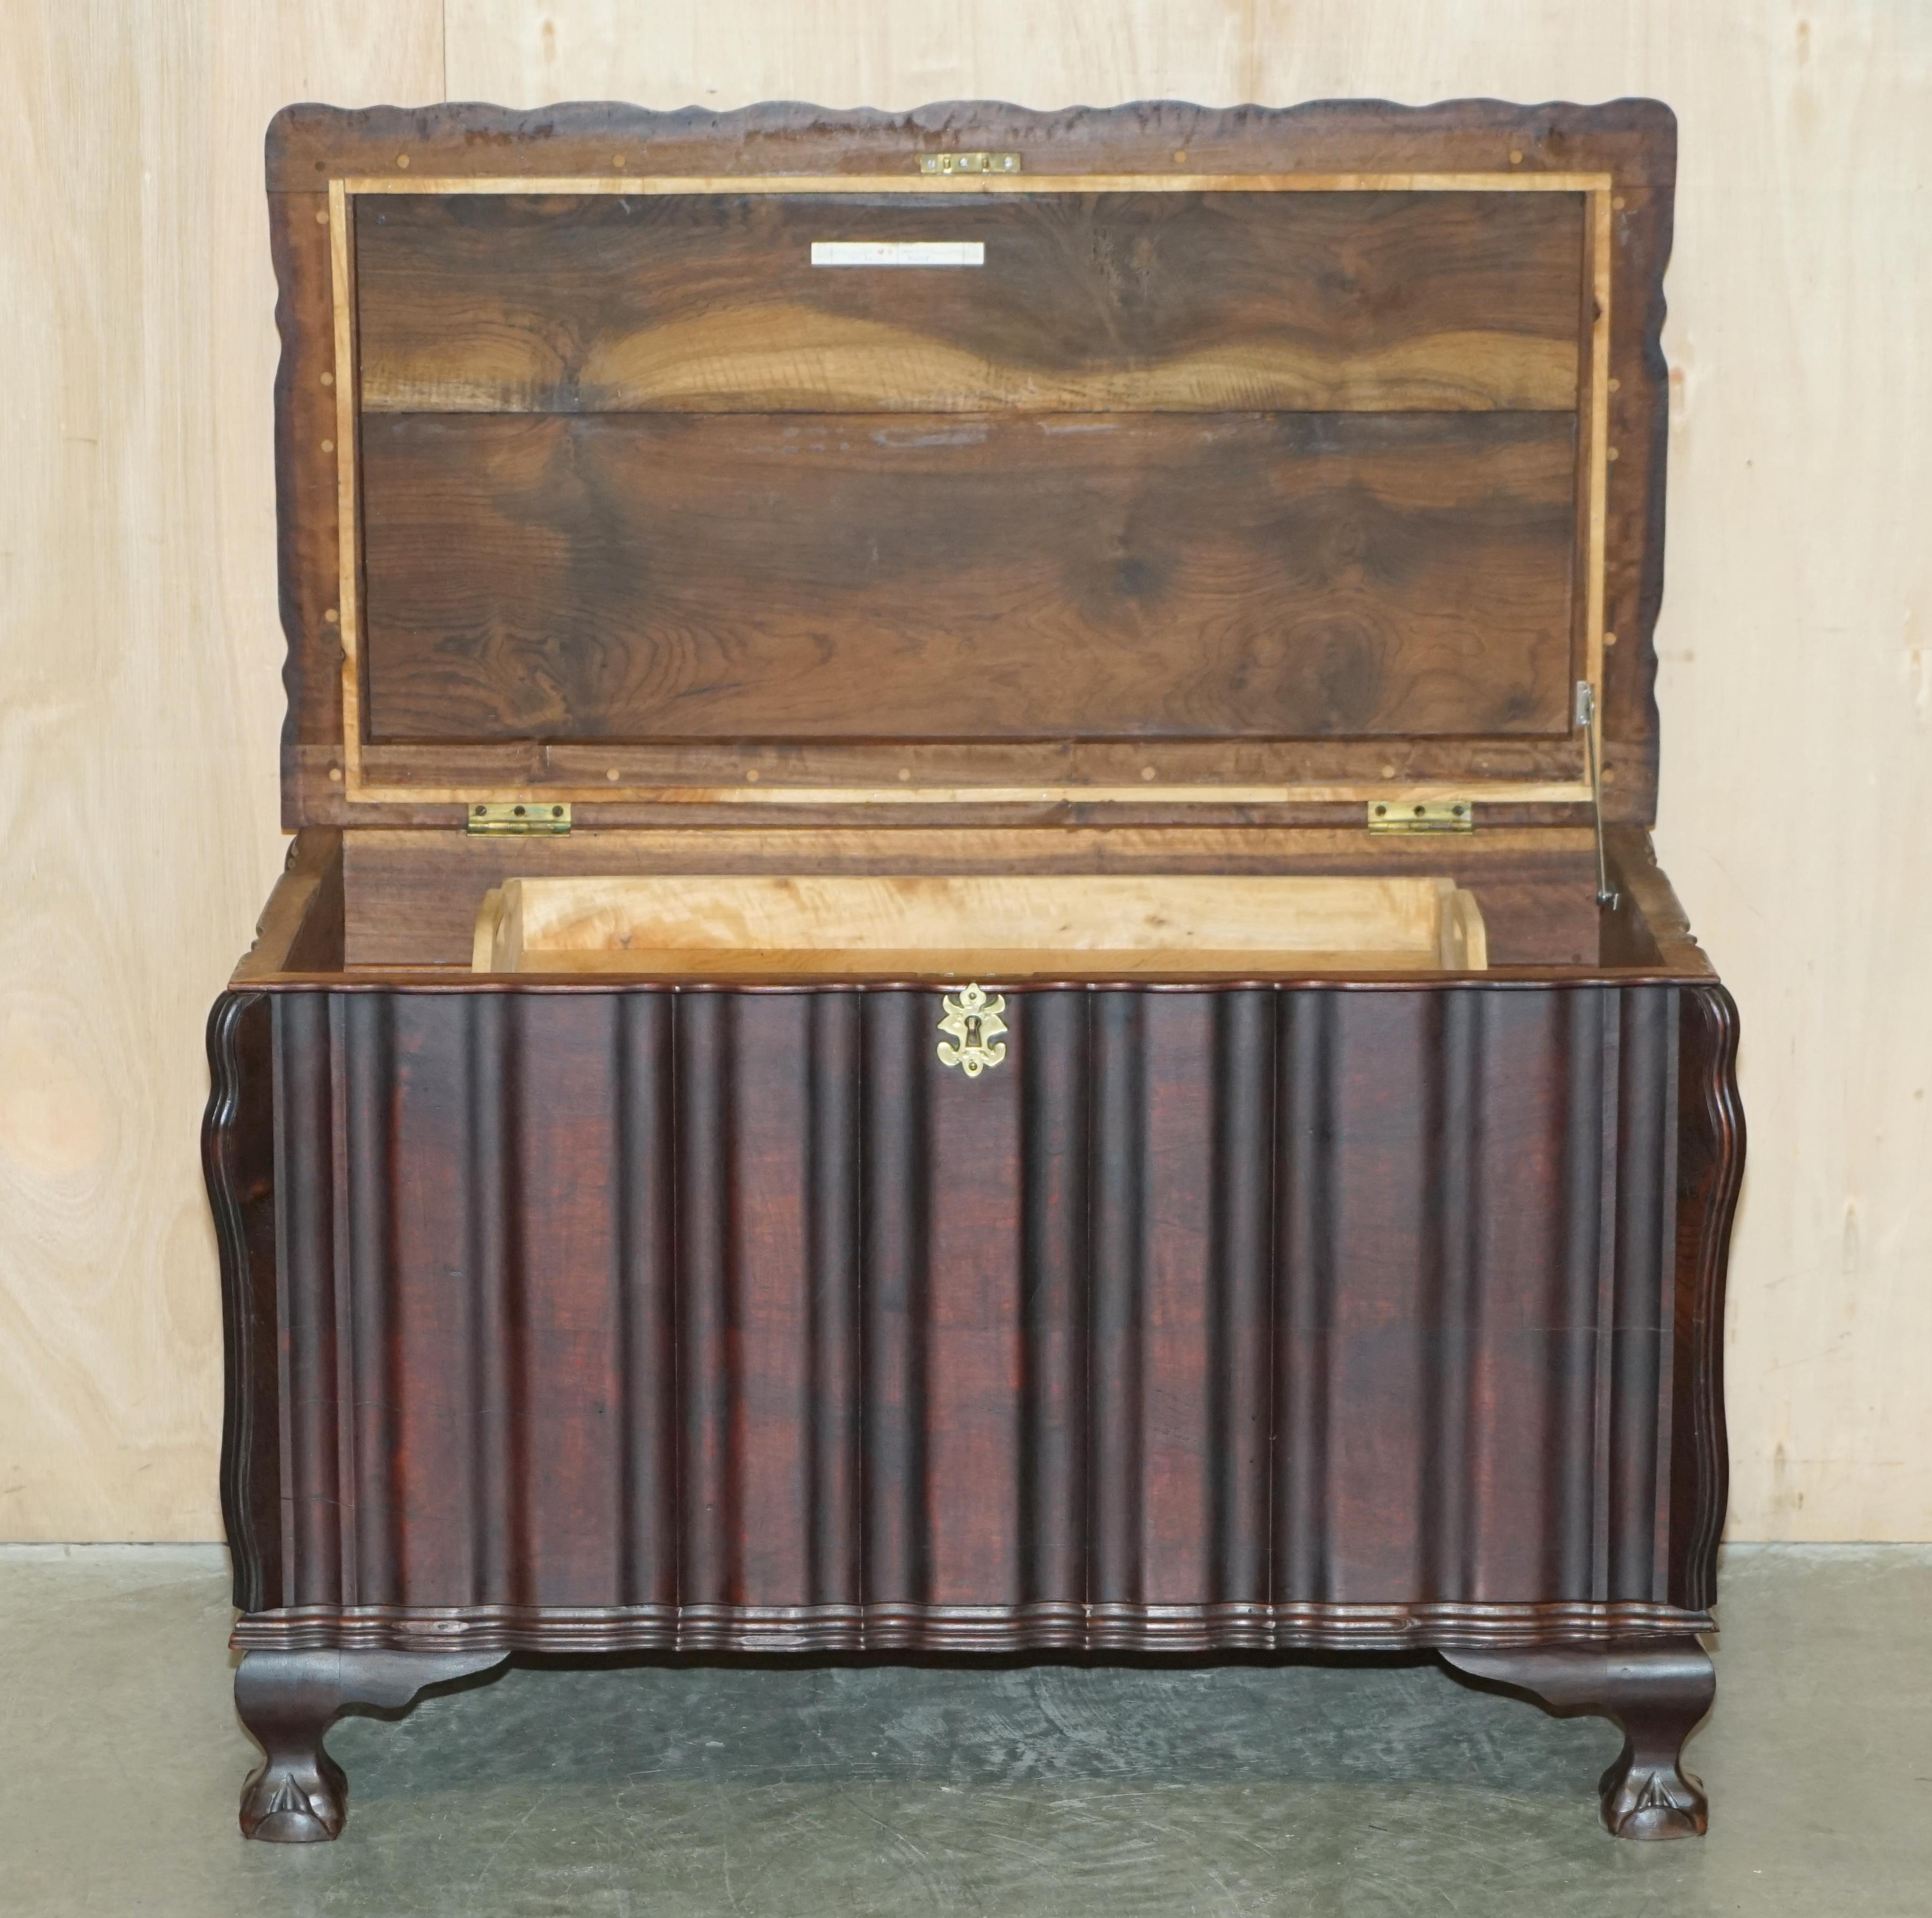 ViNTAGE HAND CARVED HARDWOOD TRUNK OR CHEST WITH ORNATE OVERSIZED BRASS FITTINGS For Sale 8